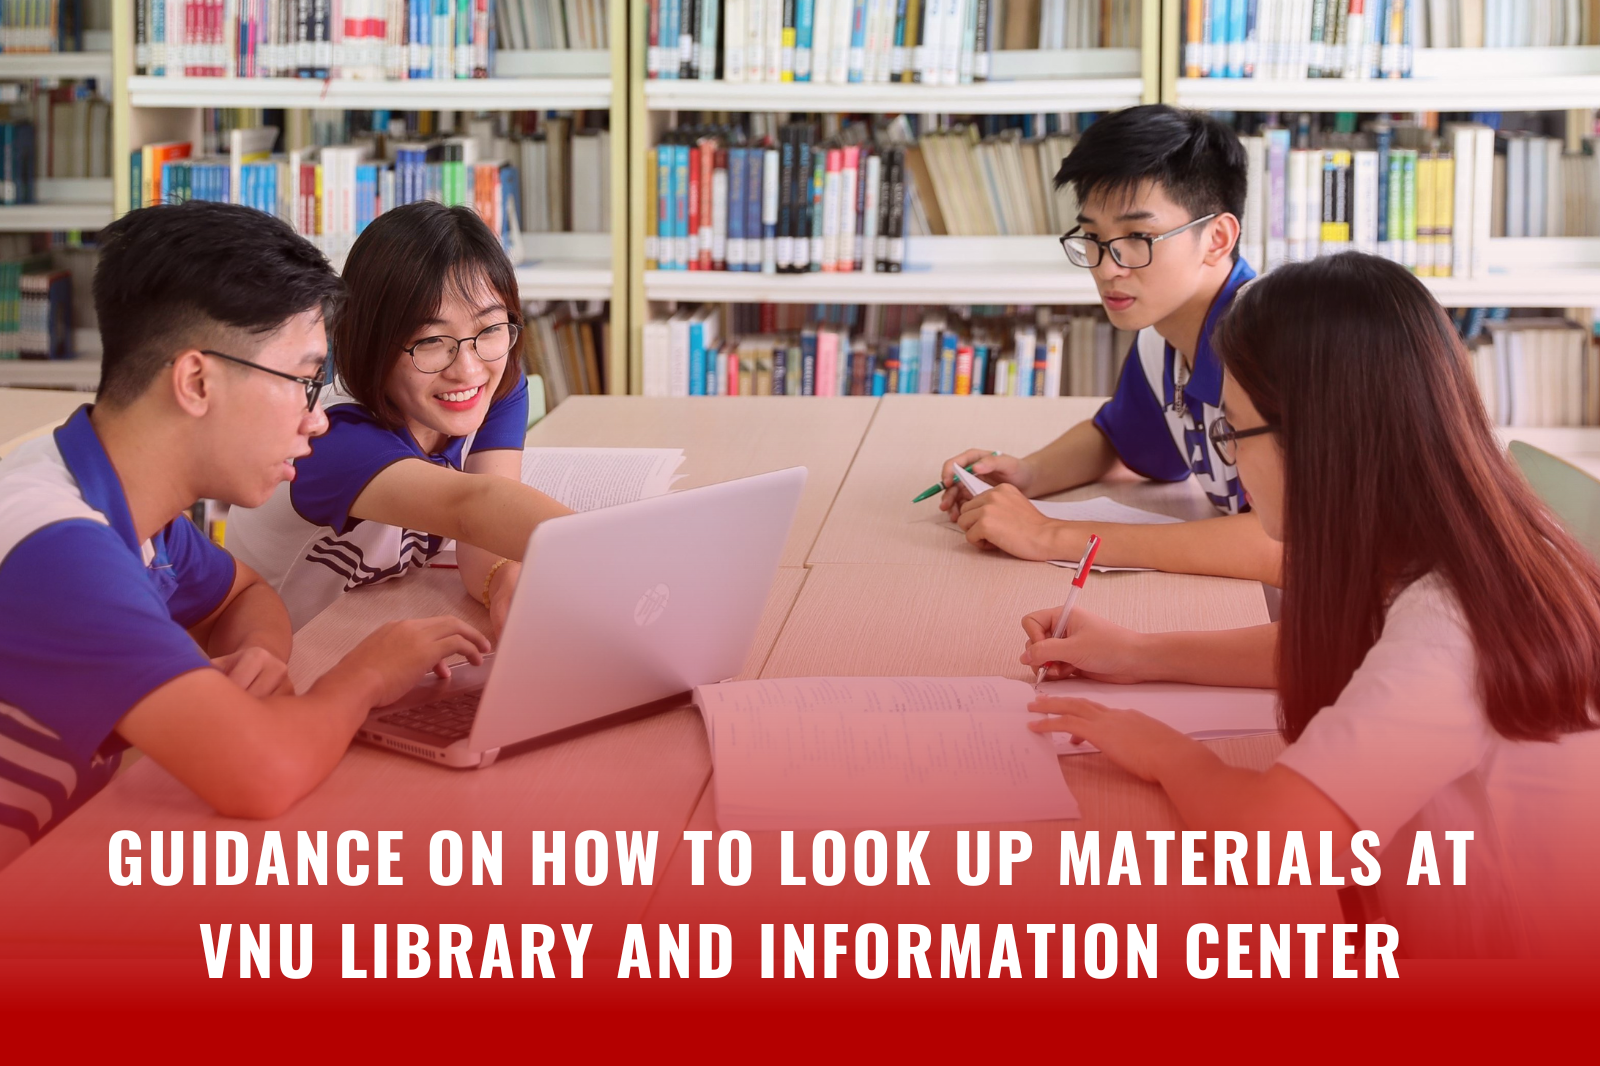 Guidance on how to look up materials at VNU Library and Information Center (VNU LIC)